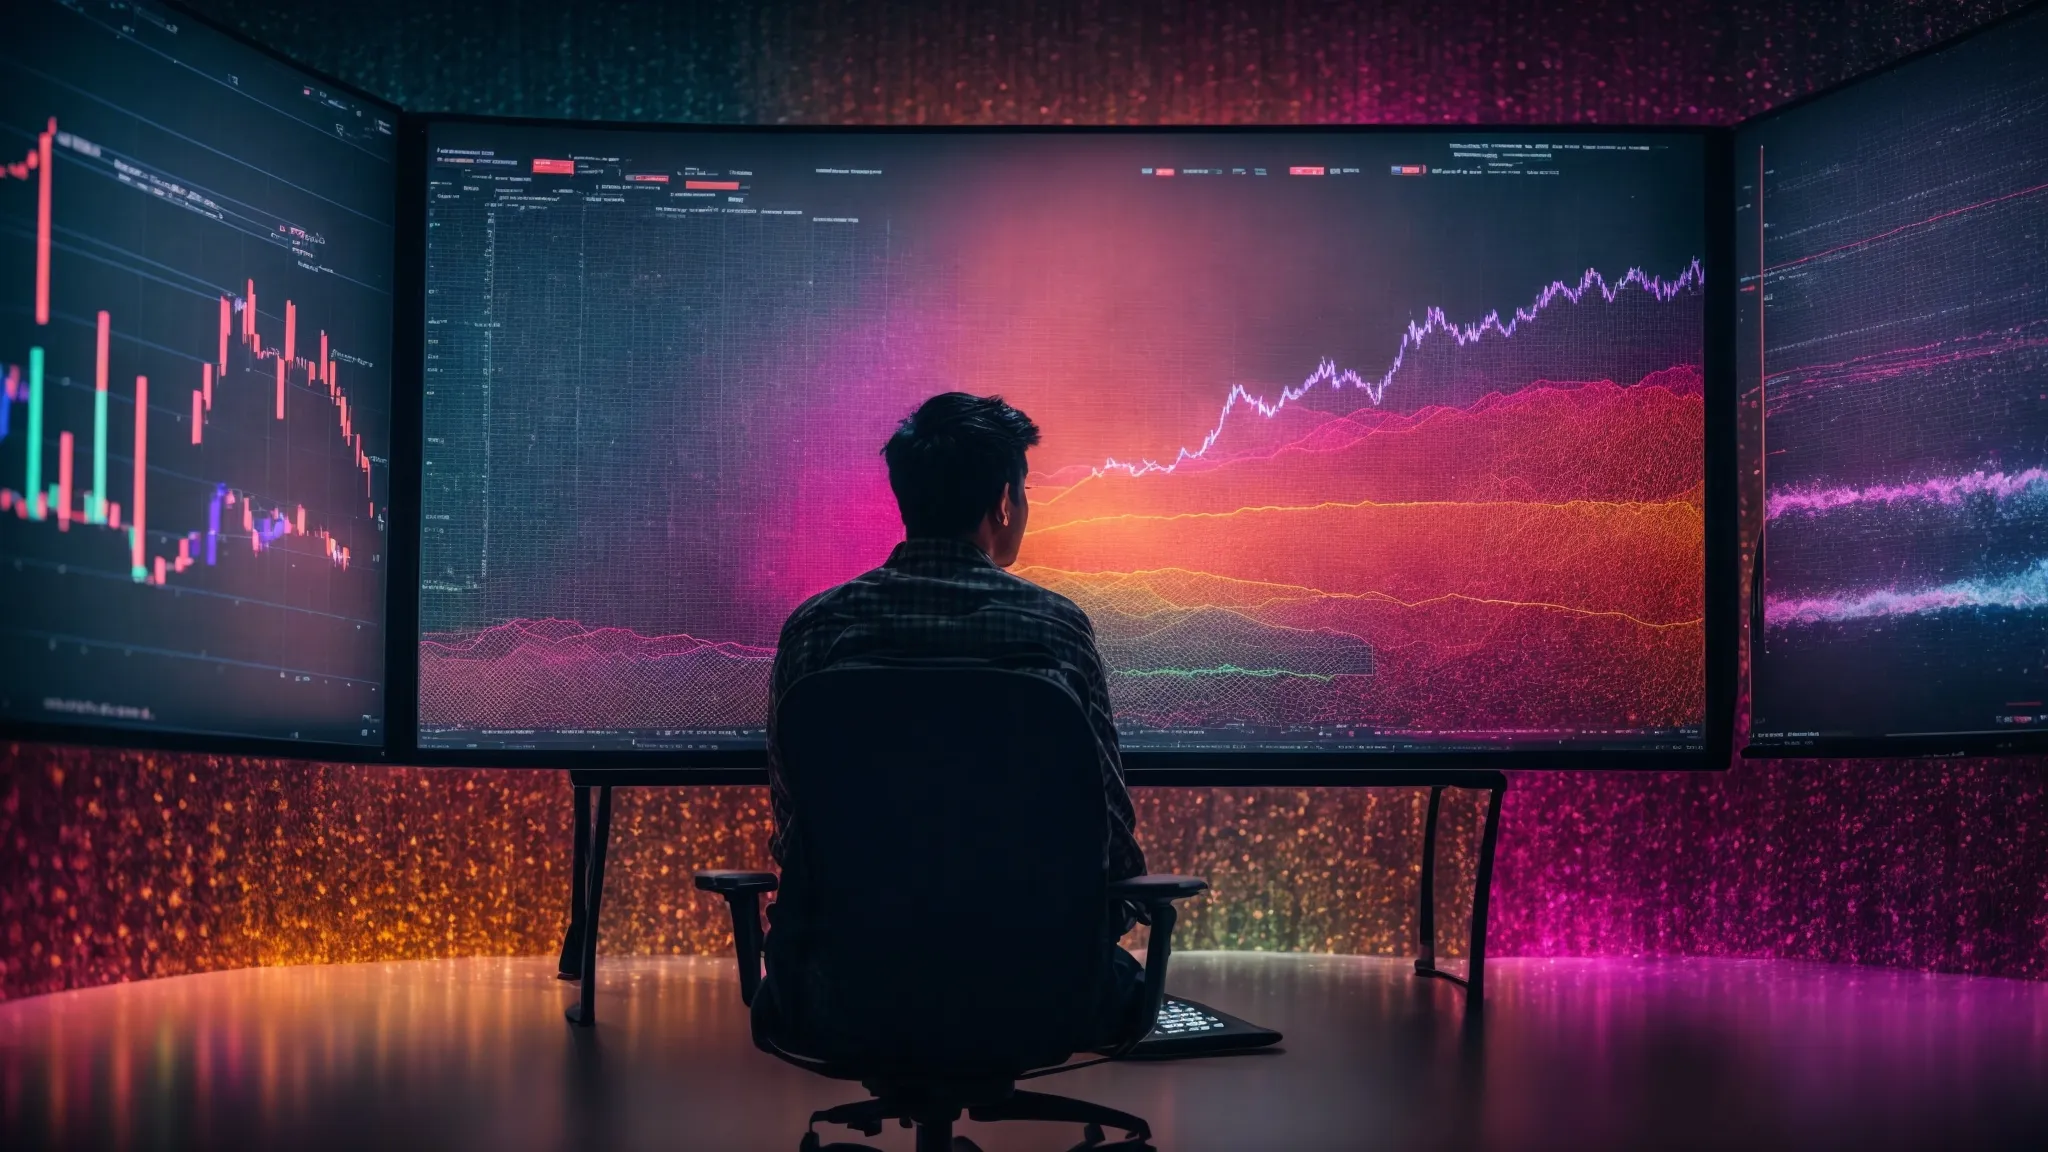 a person sits immersed in front of a large monitor displaying colorful analytics and graphs related to search engine optimization.